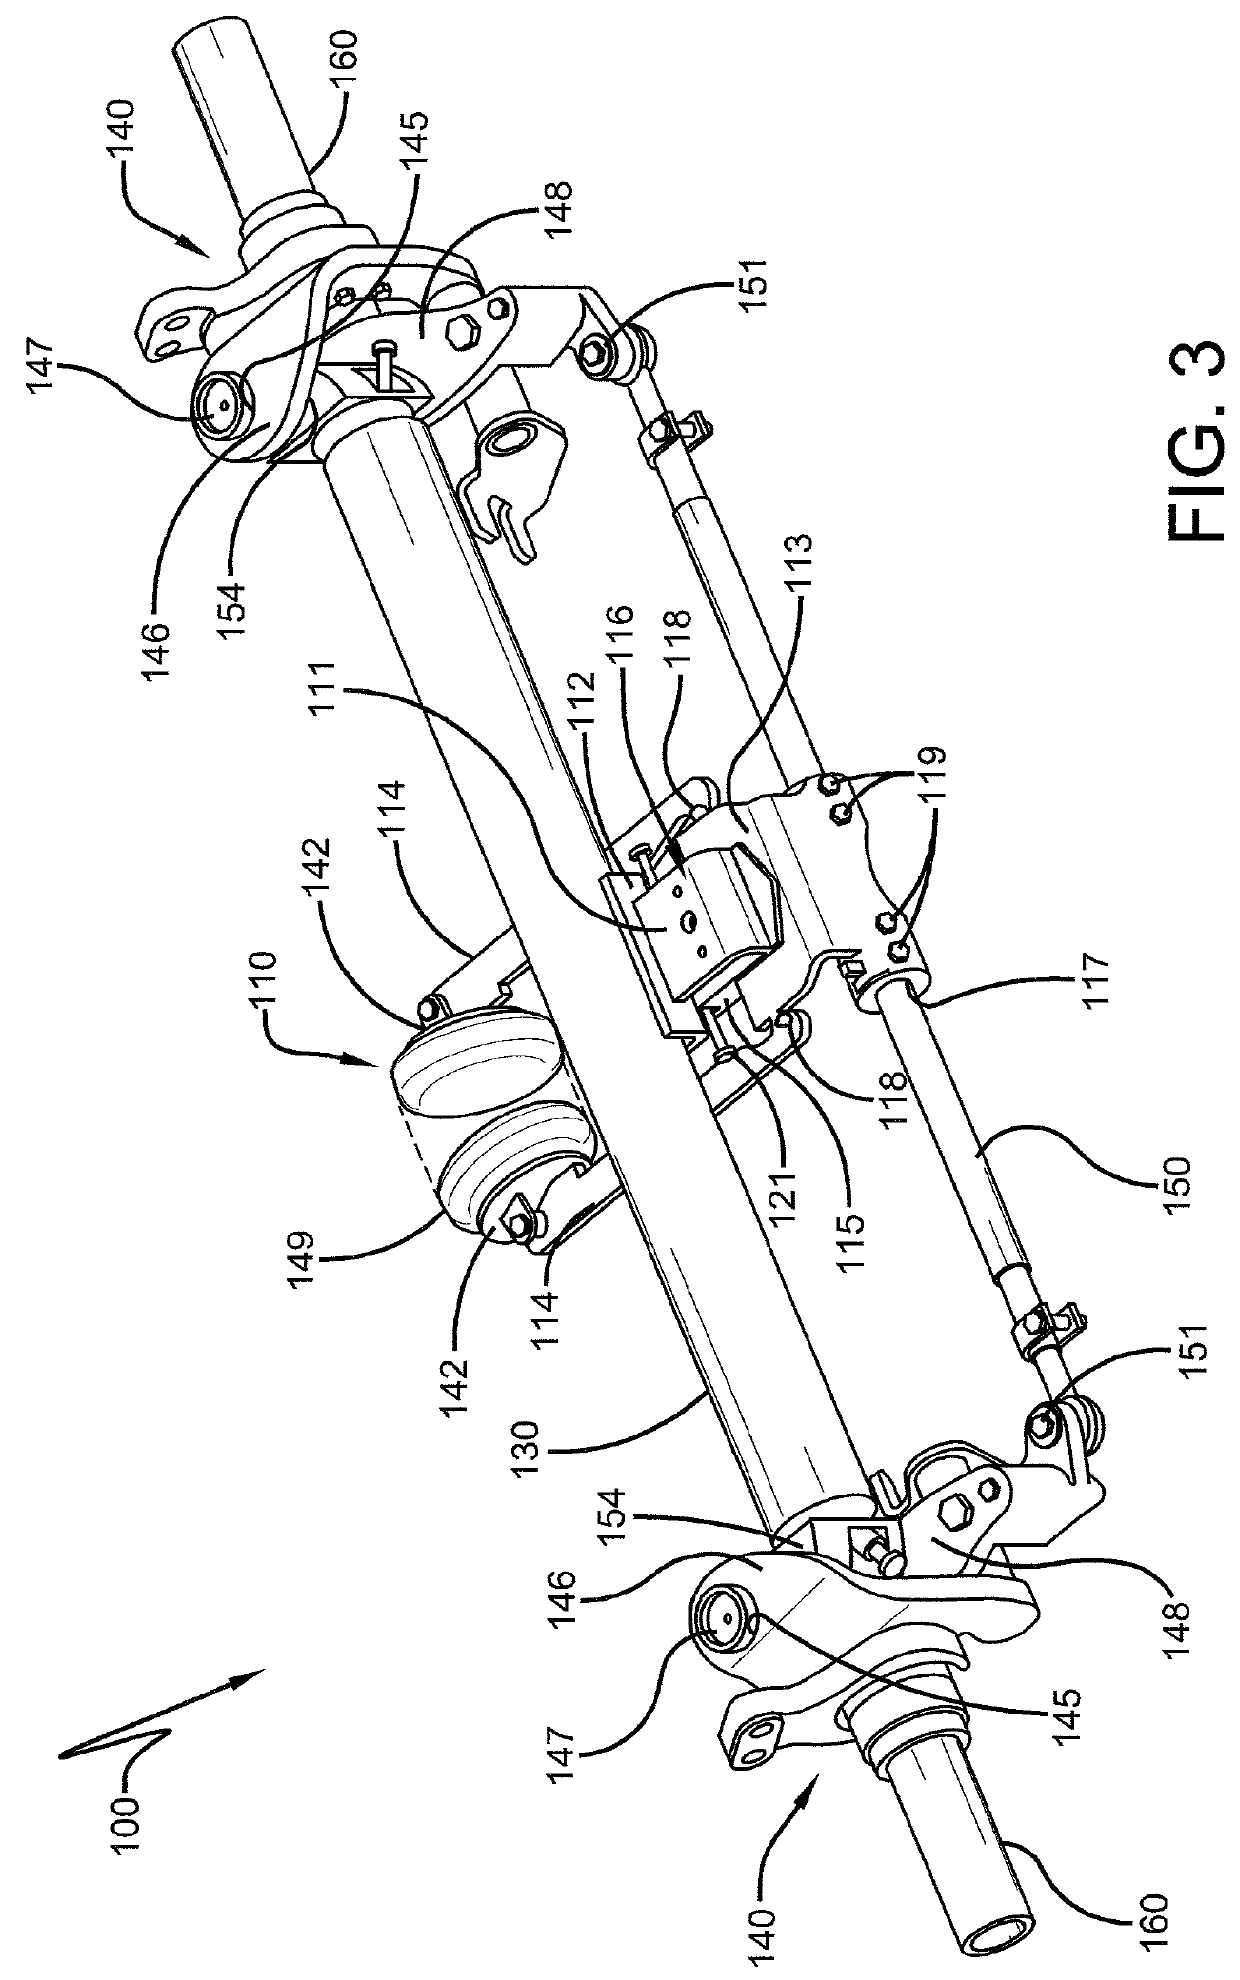 Steering centering/damping mechanism for a steerable heavy-duty vehicle axle/suspension system